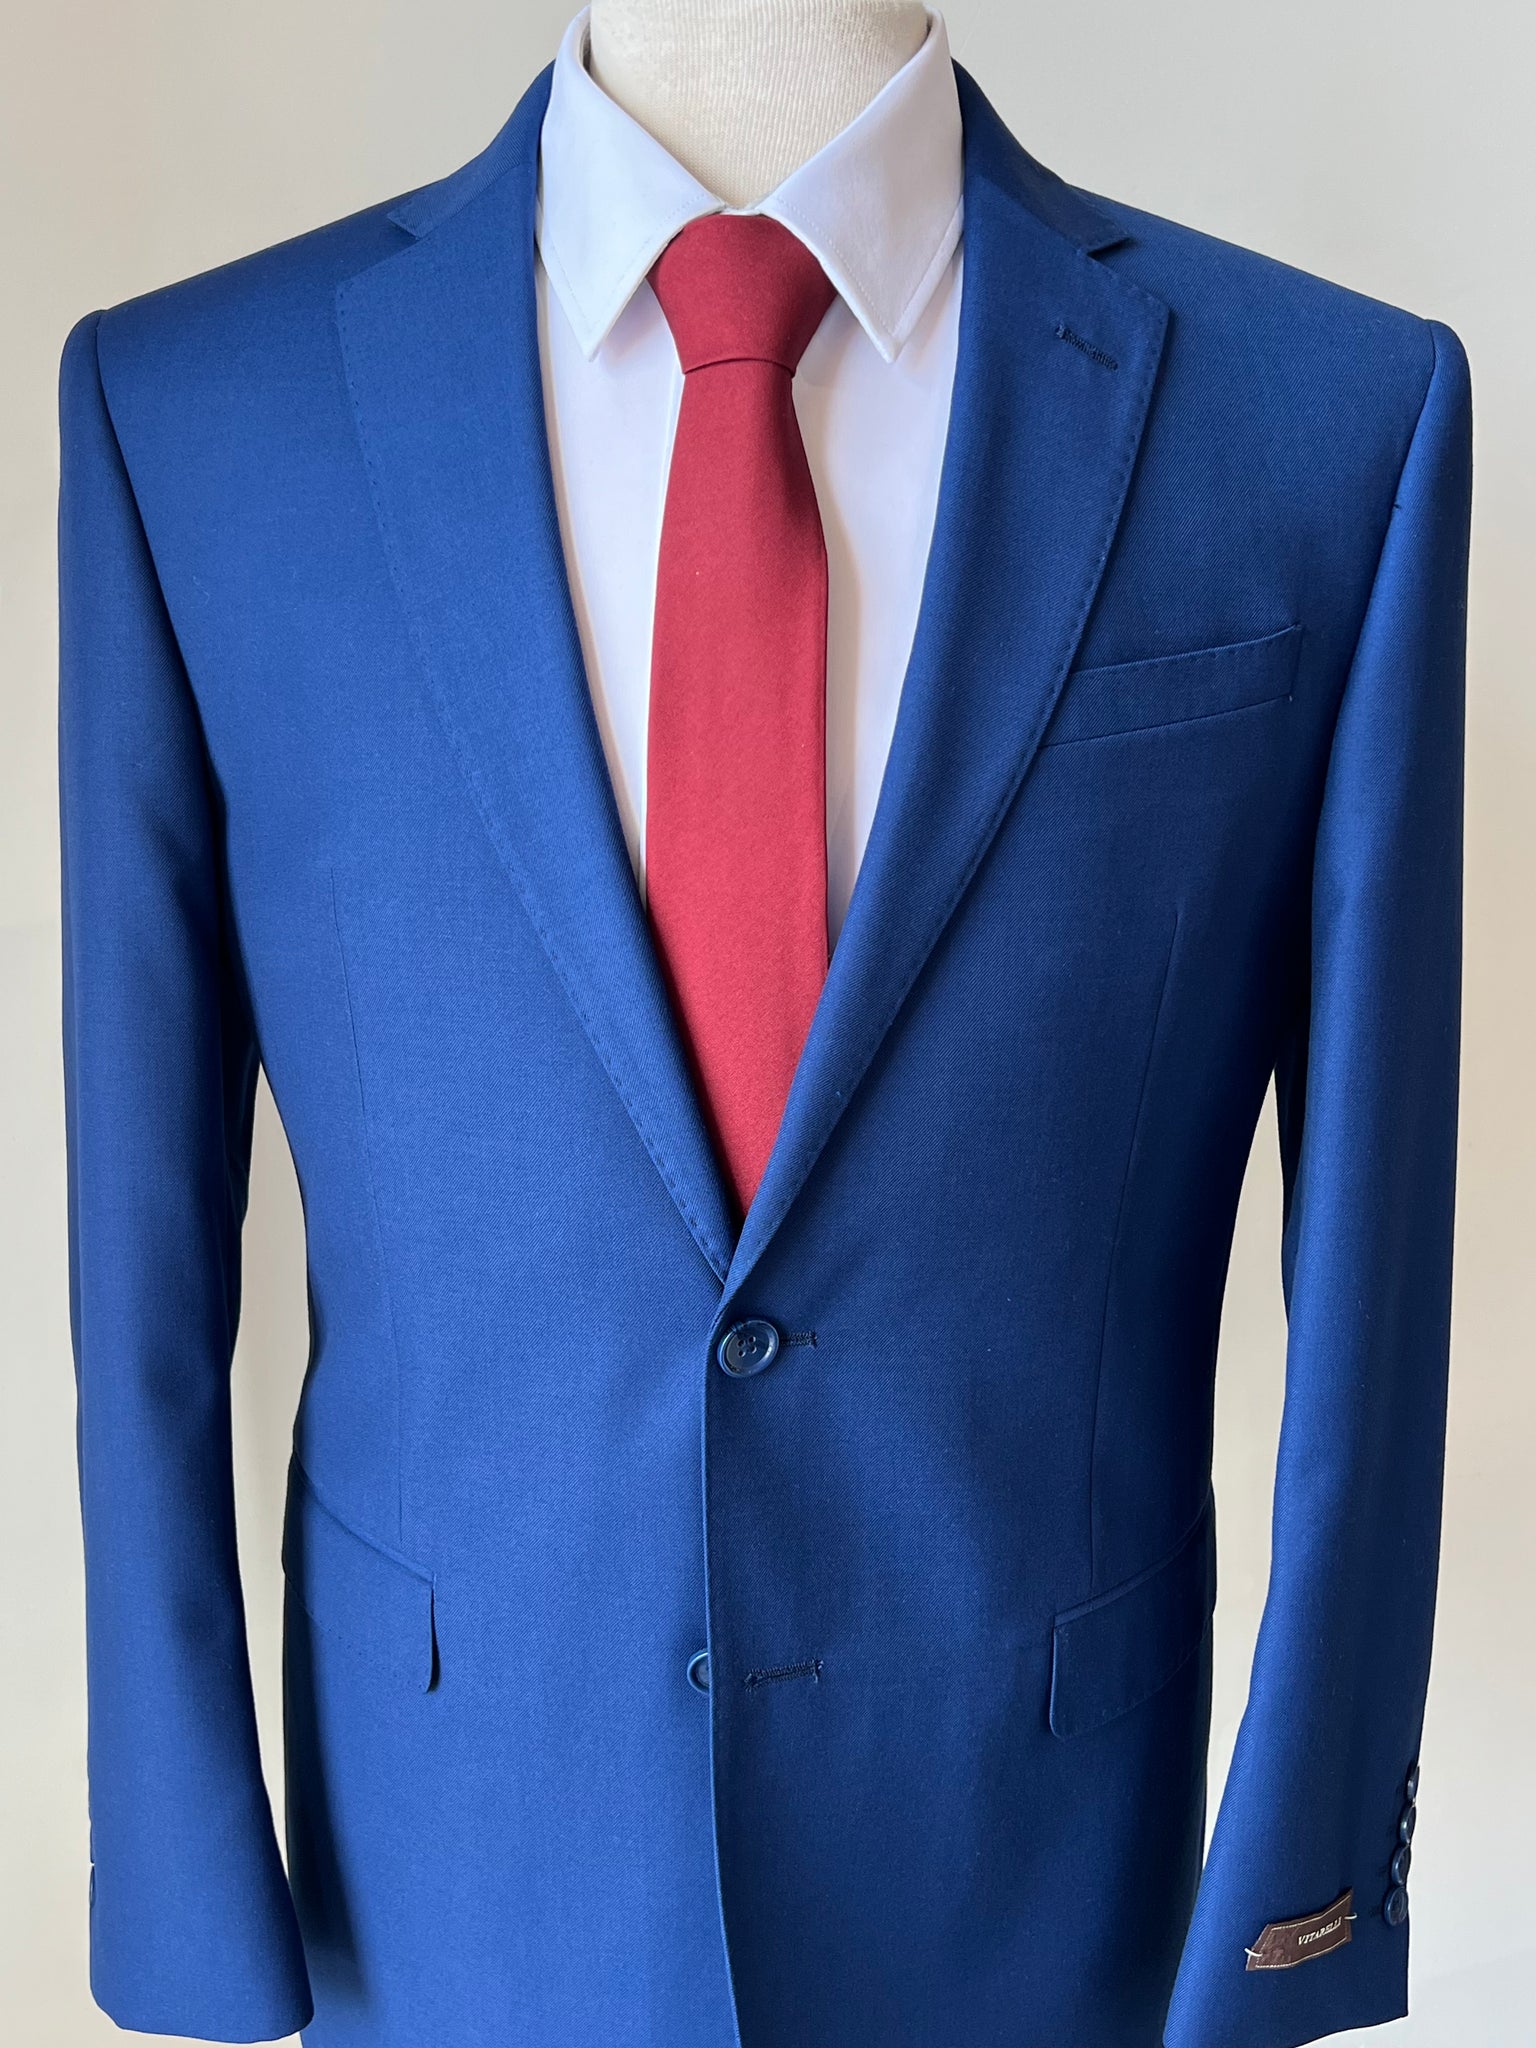 royal blue tie with suit